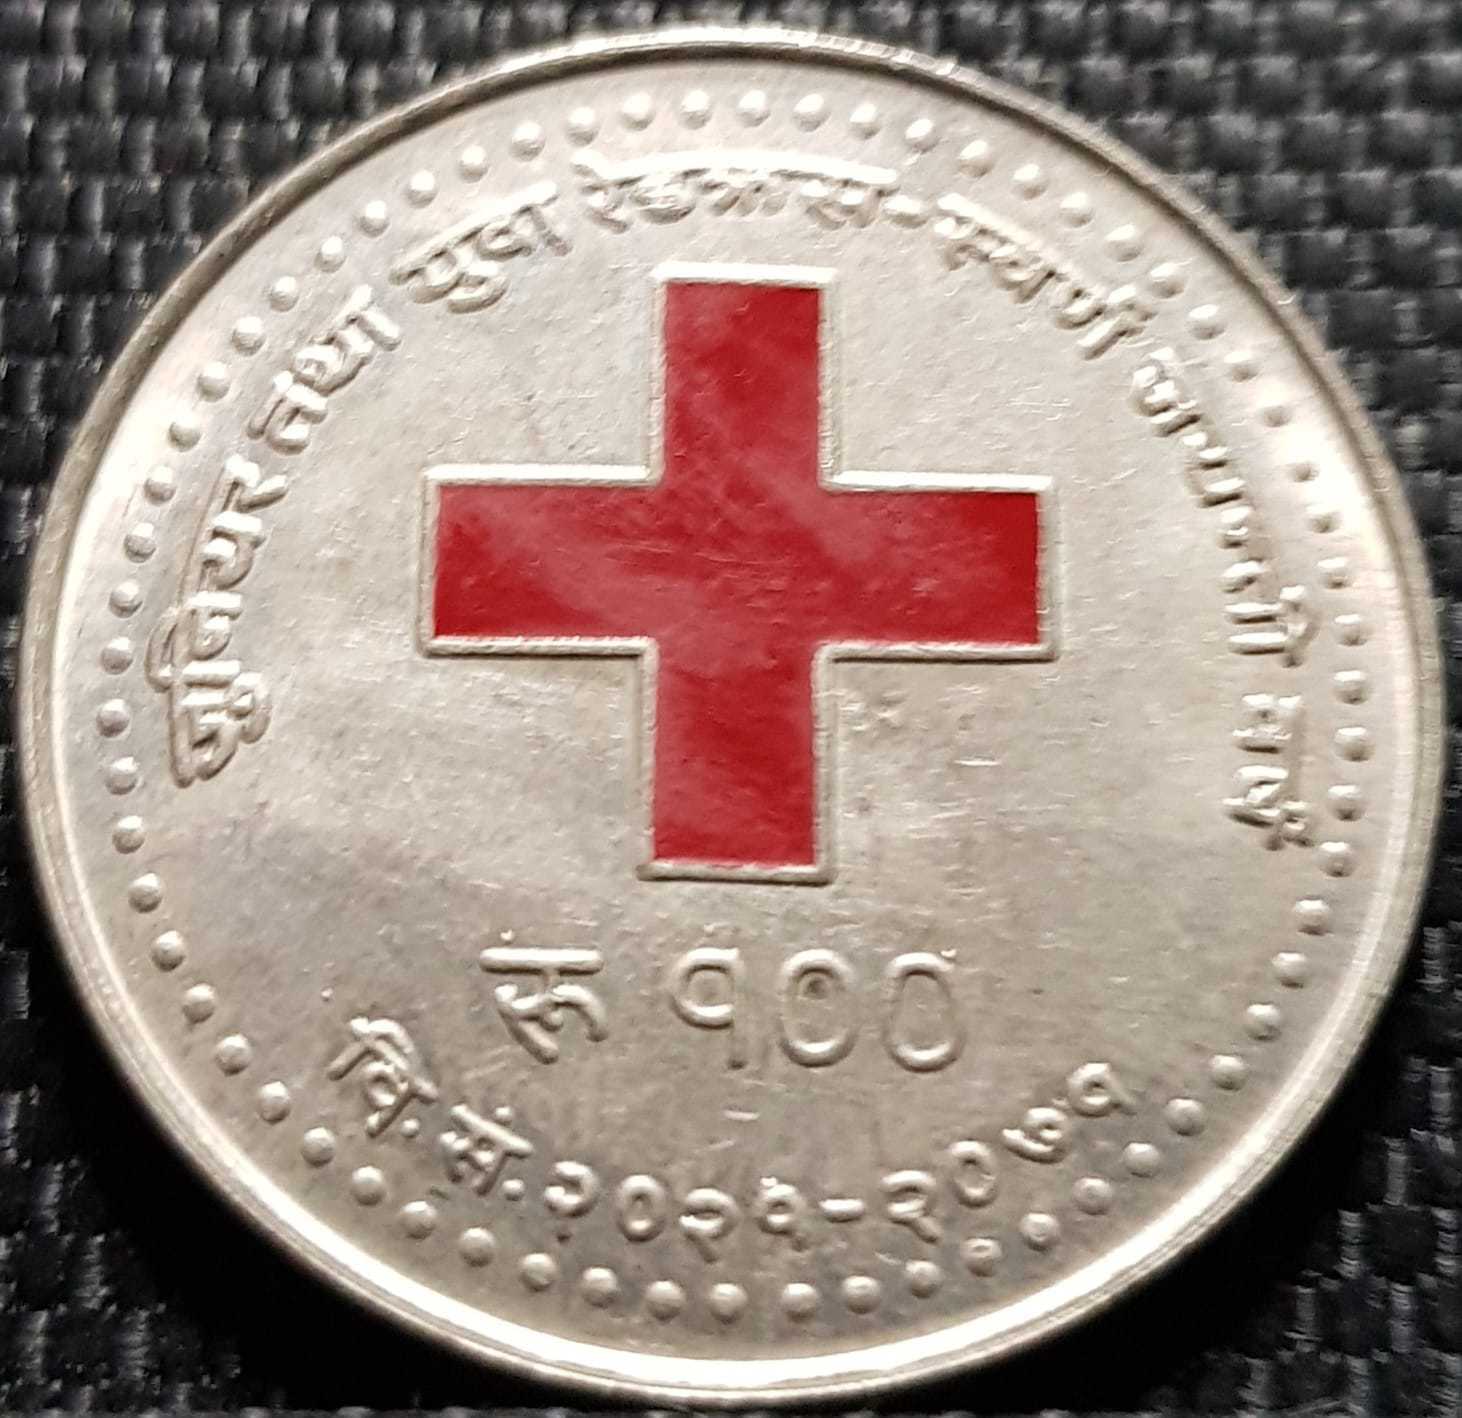 Nepal Ad2014 Rs 100 Rupee Commemorative Coin, Dia 29mm(+free 1 Coin) #d4476